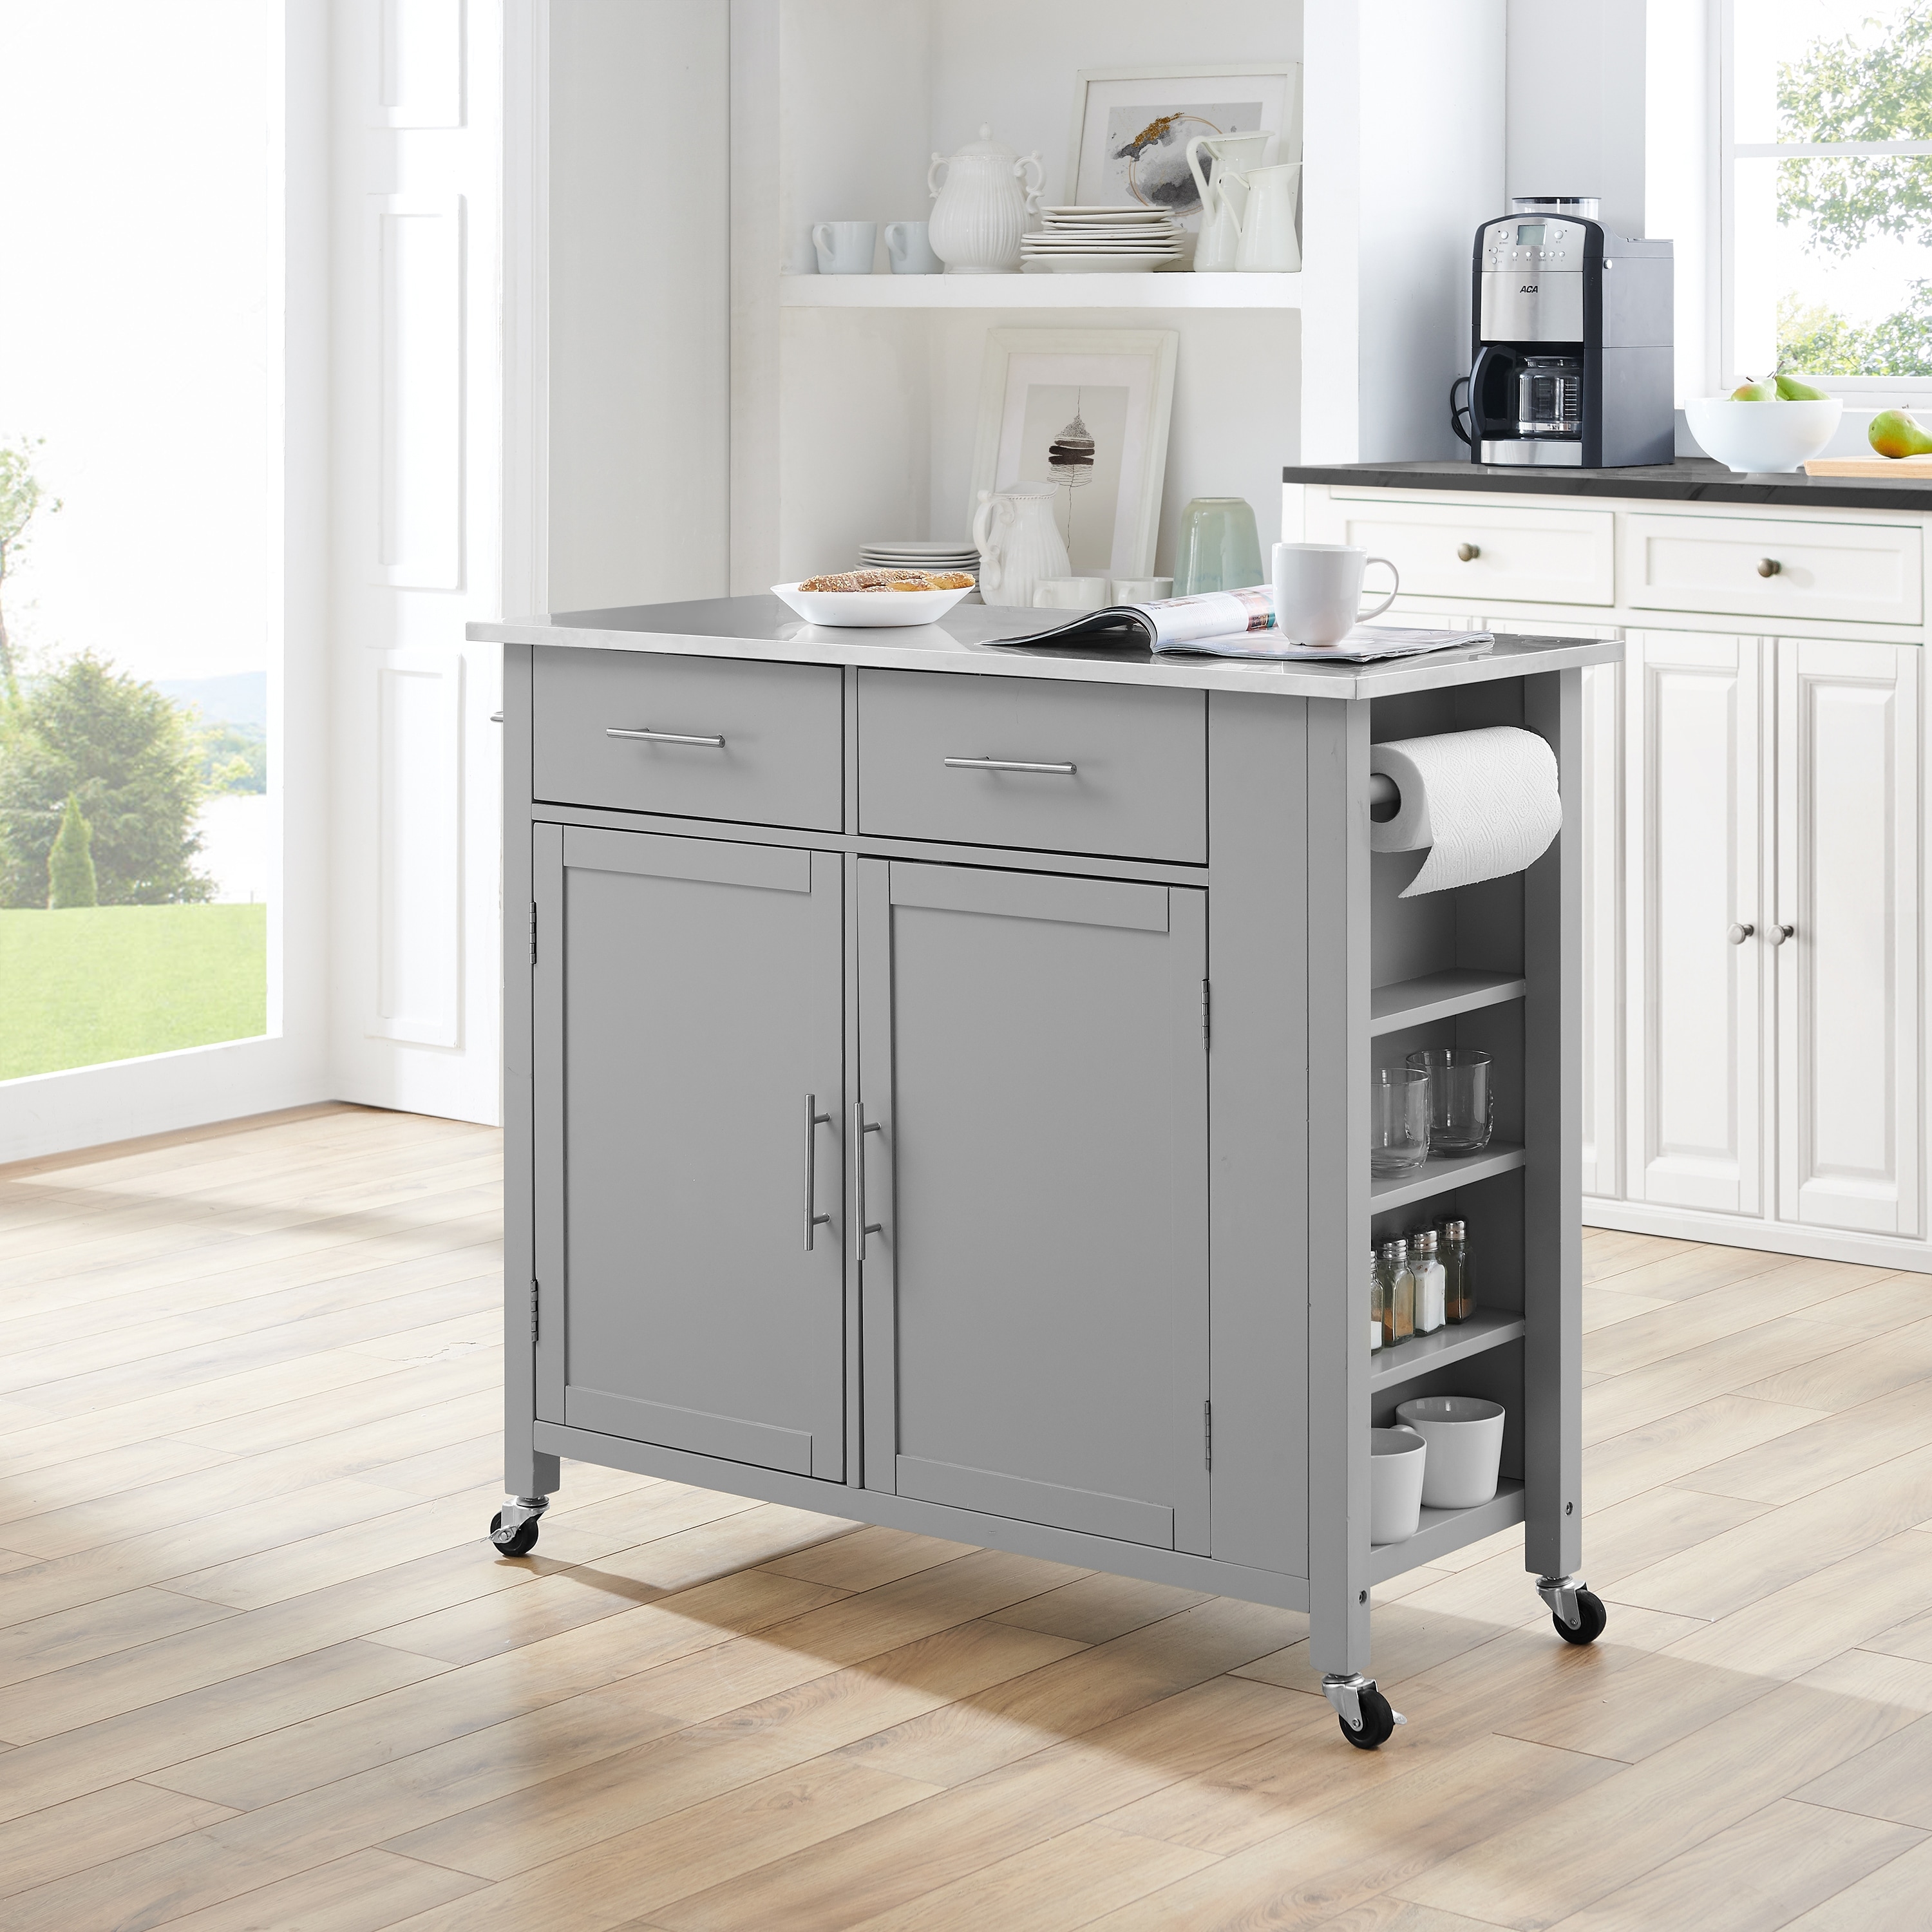 Savannah Stainless Steel Top Full Size Kitchen Island Cart 37h X 42w X 1825d On Sale Overstock 31104184